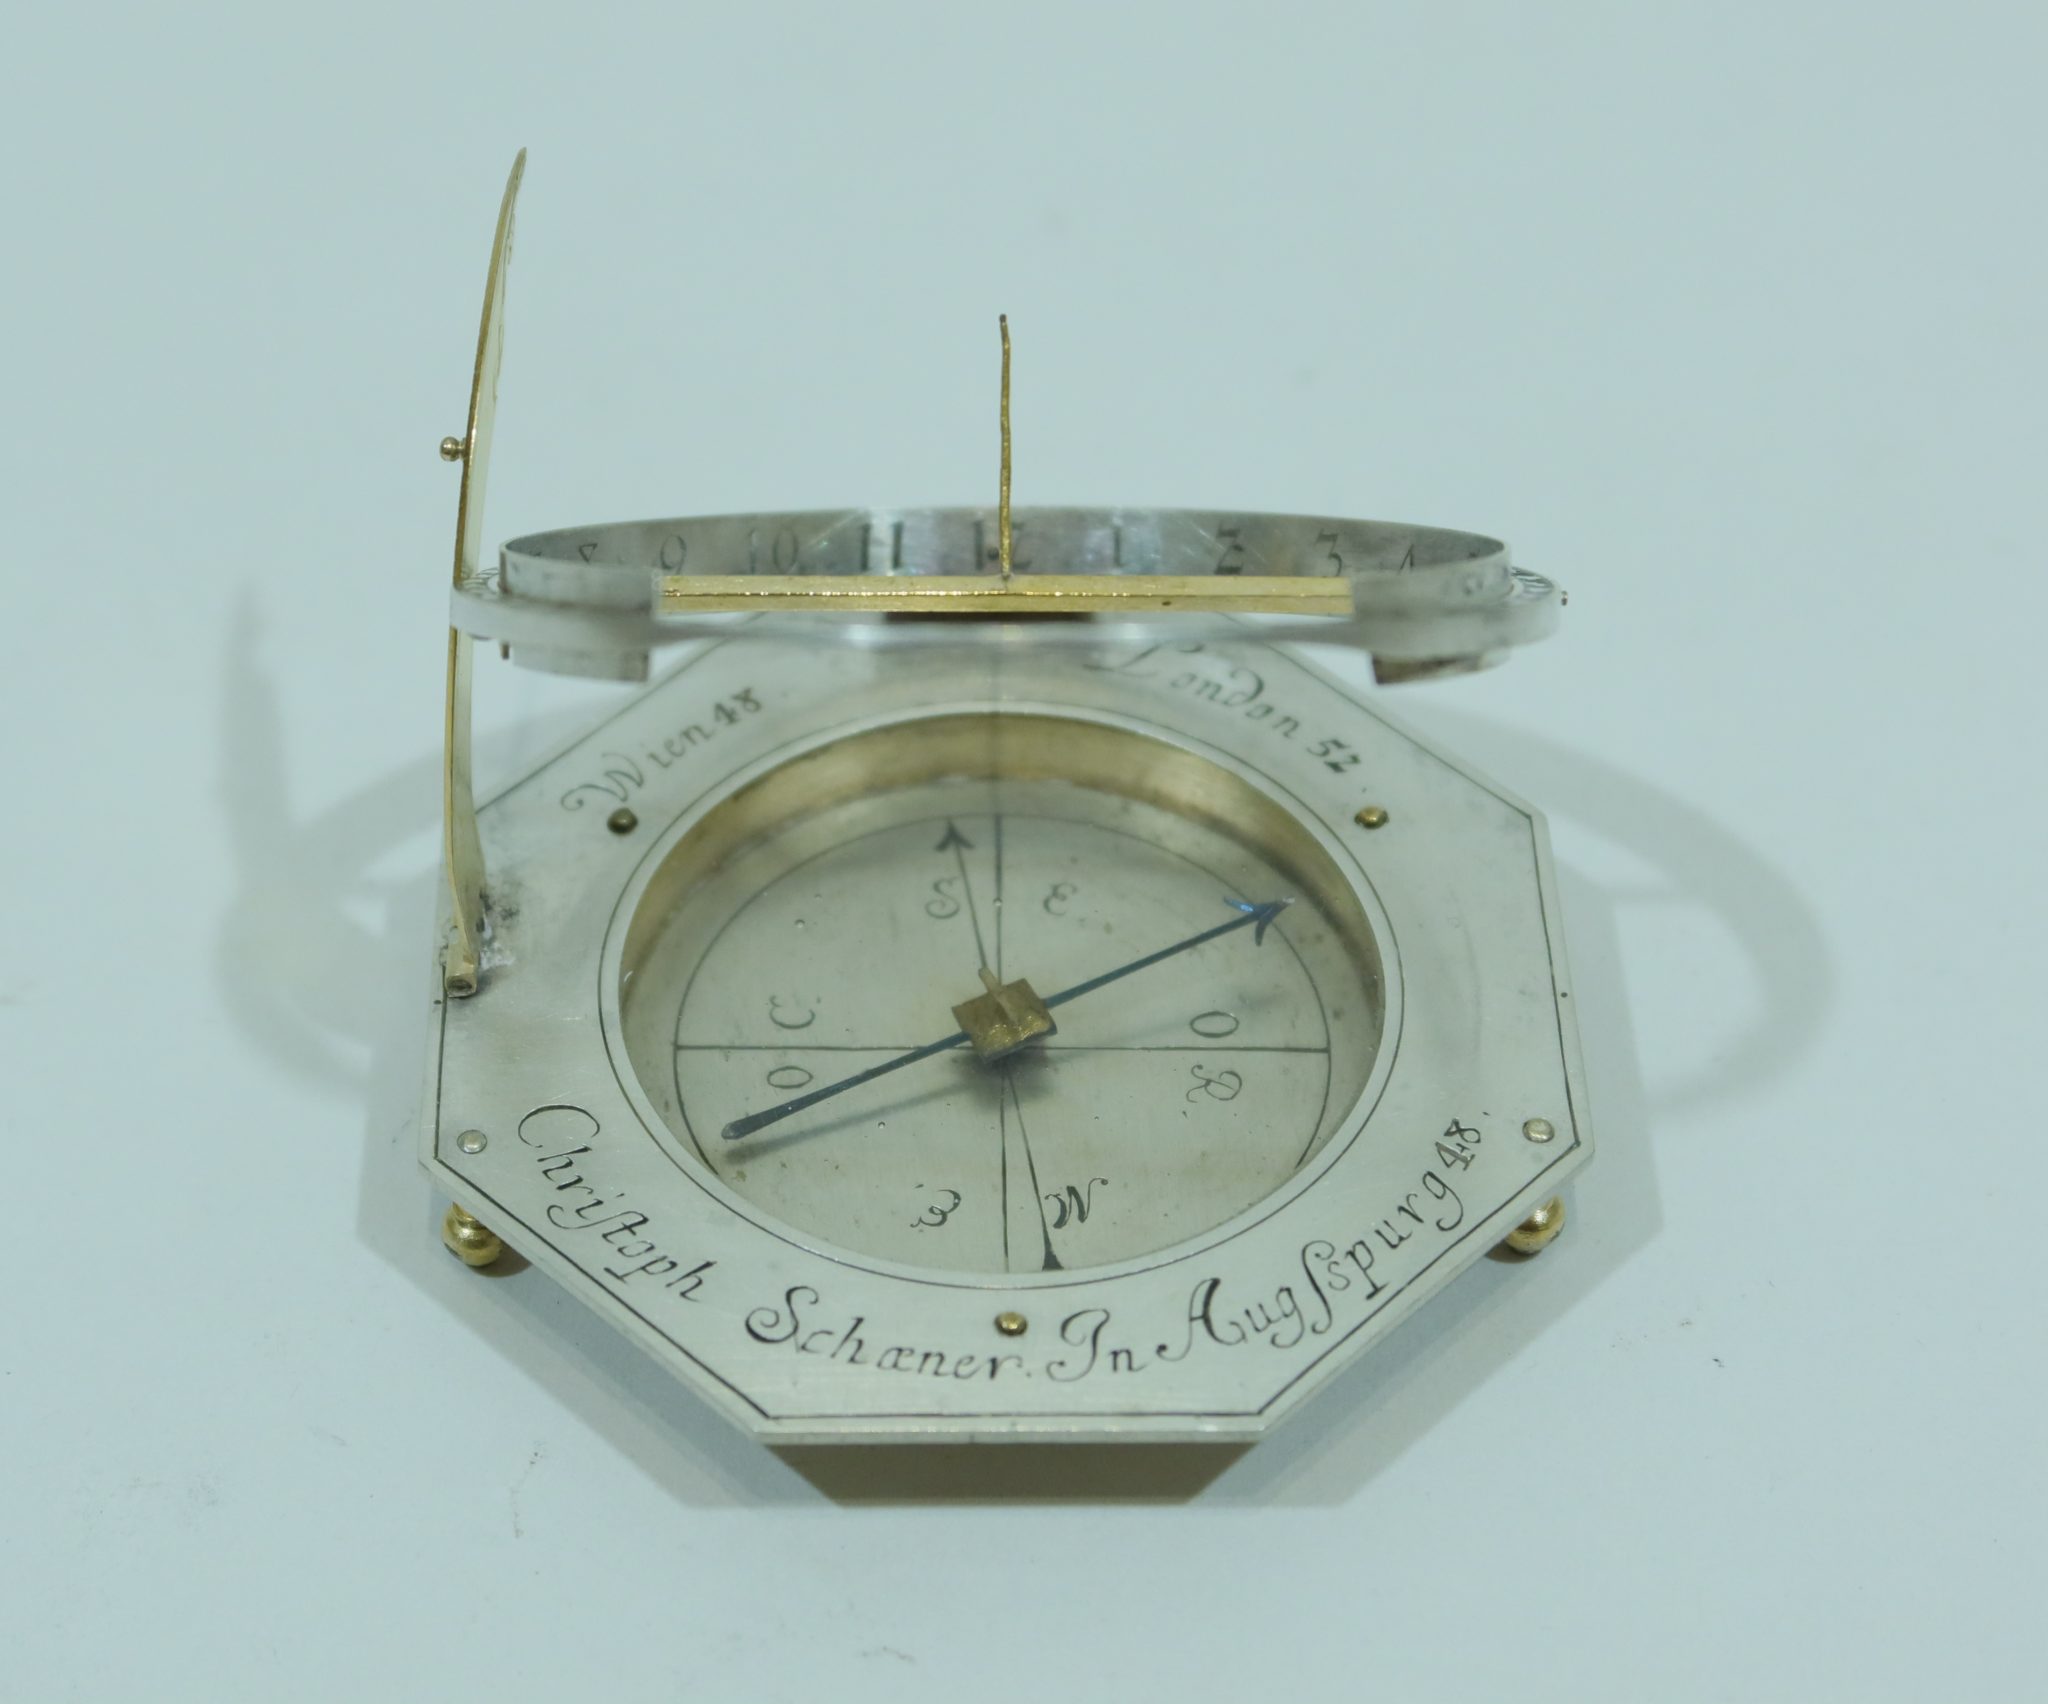 Equinoctial sundial in silver signed Christoph Schoener made circa 1690